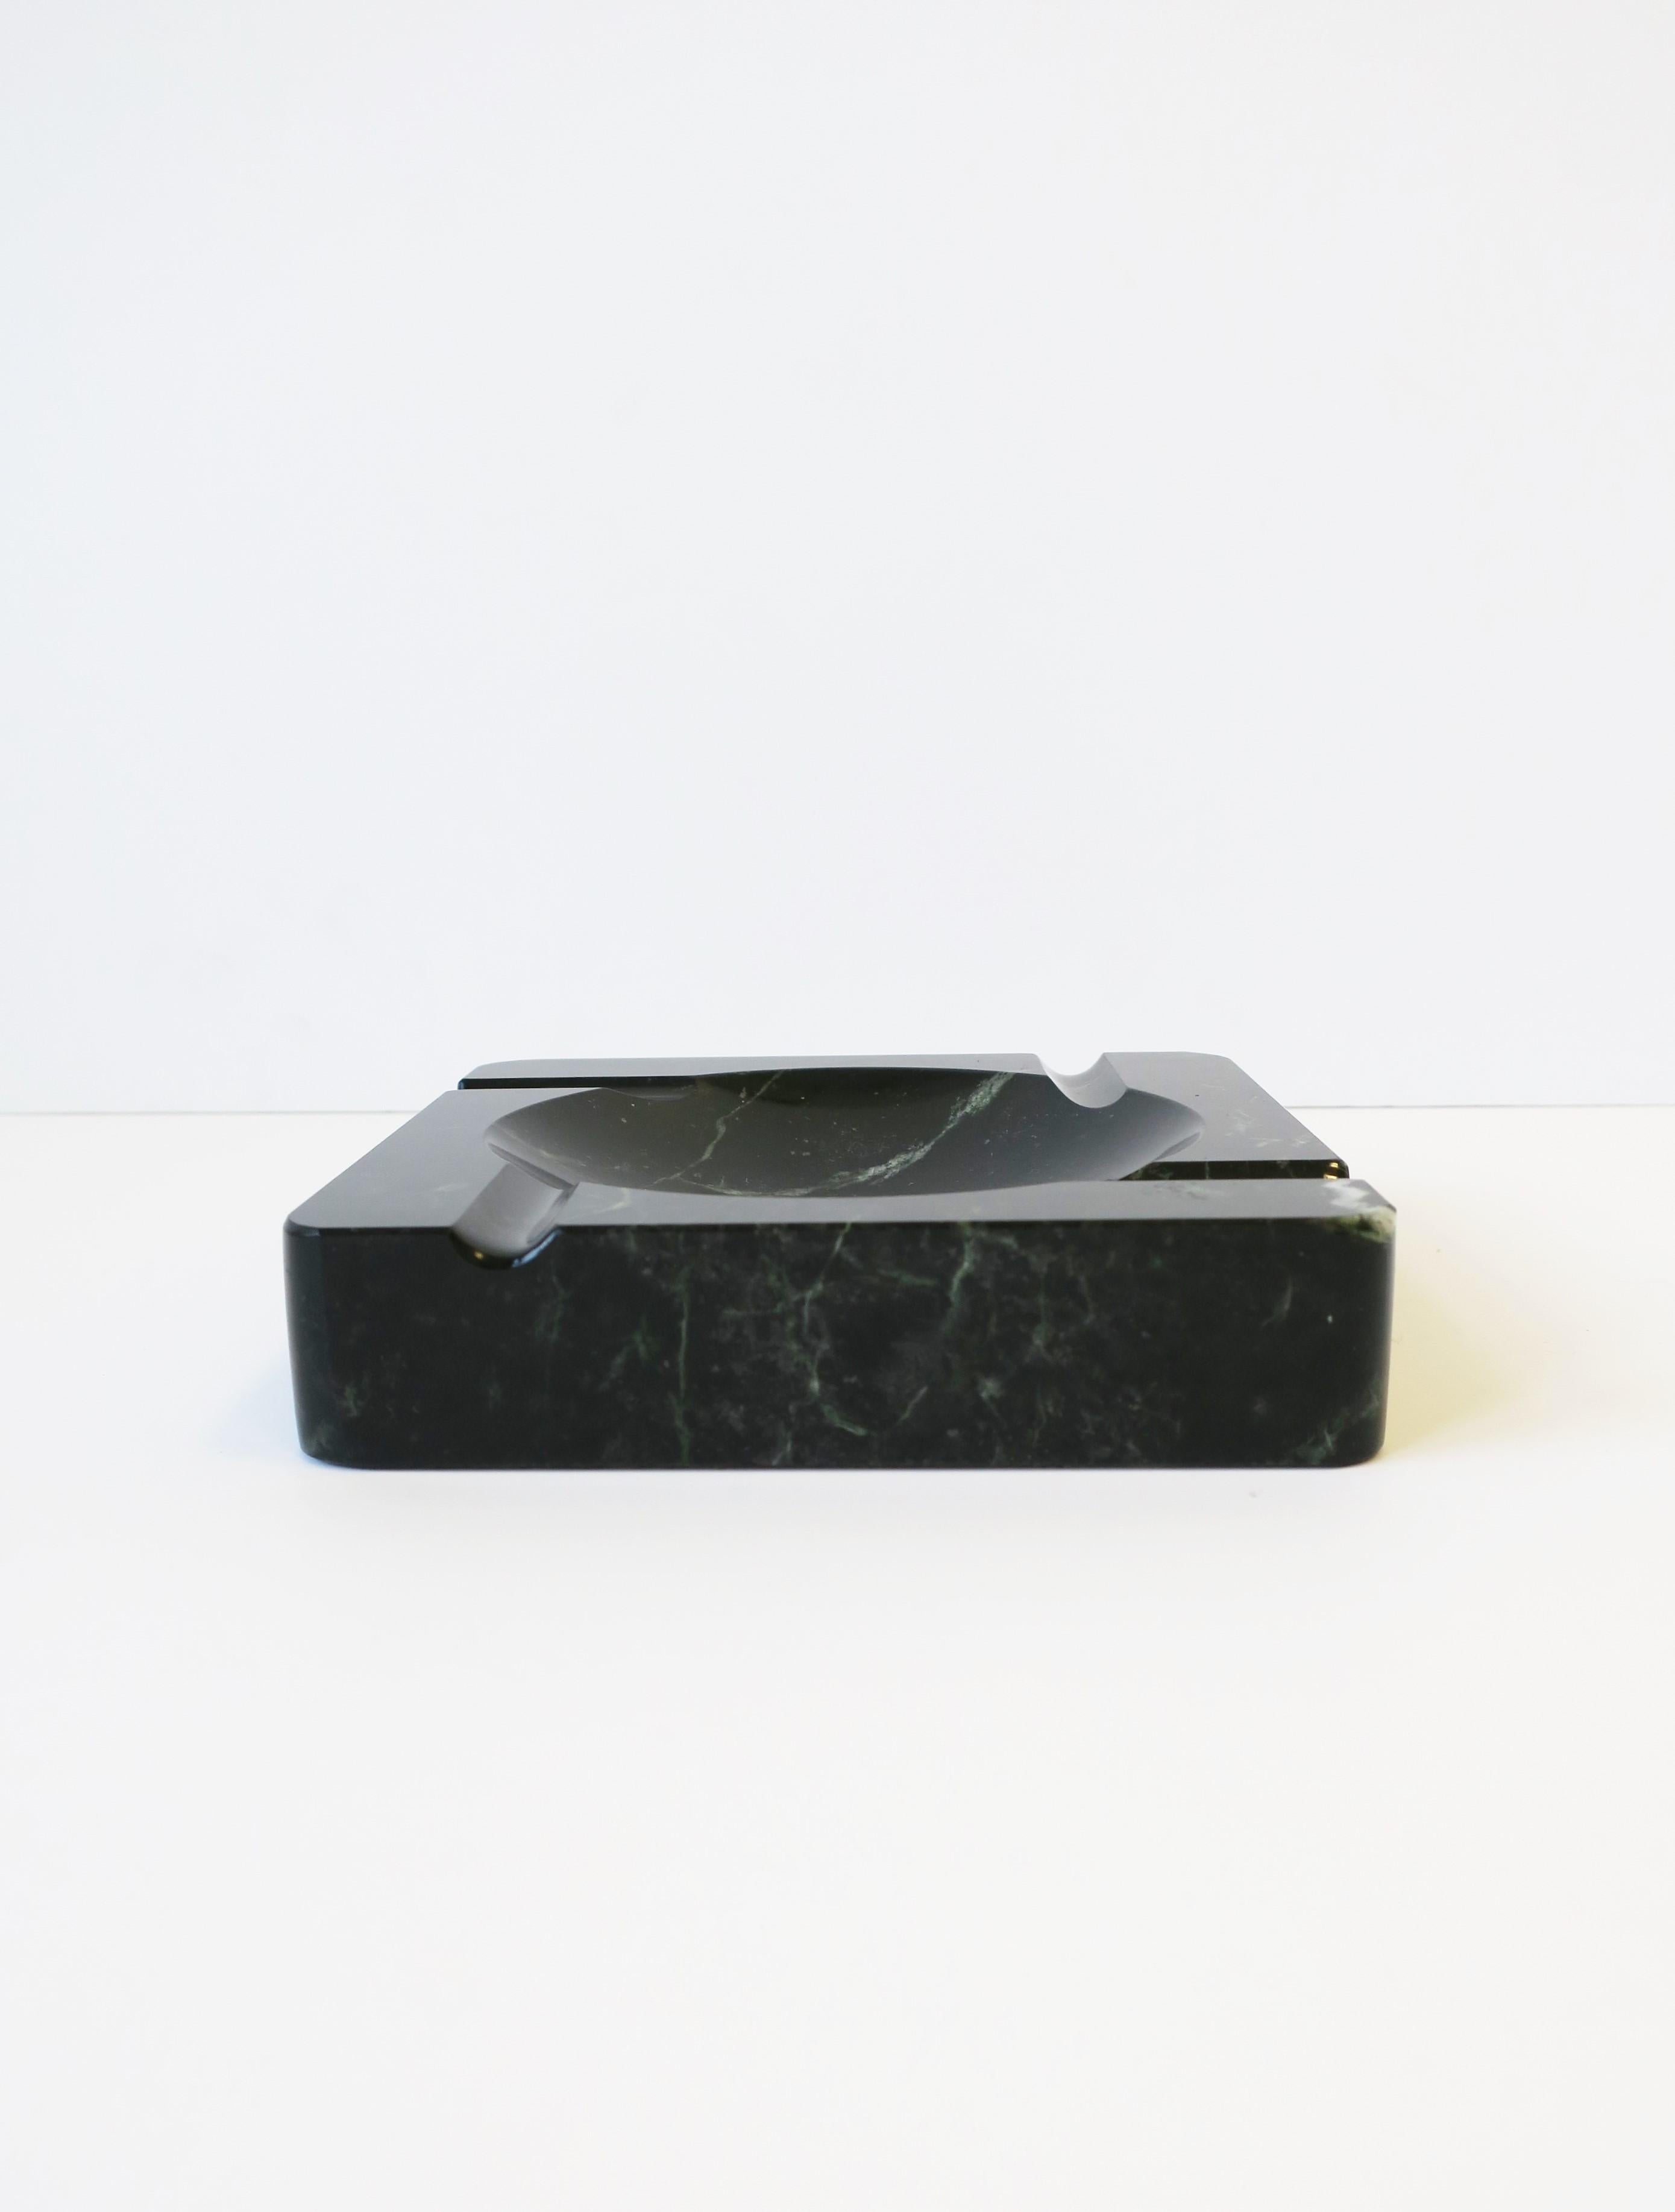 Italian Marble Catchall Vide-Poche or Ashtray, Italy 1970s For Sale 5